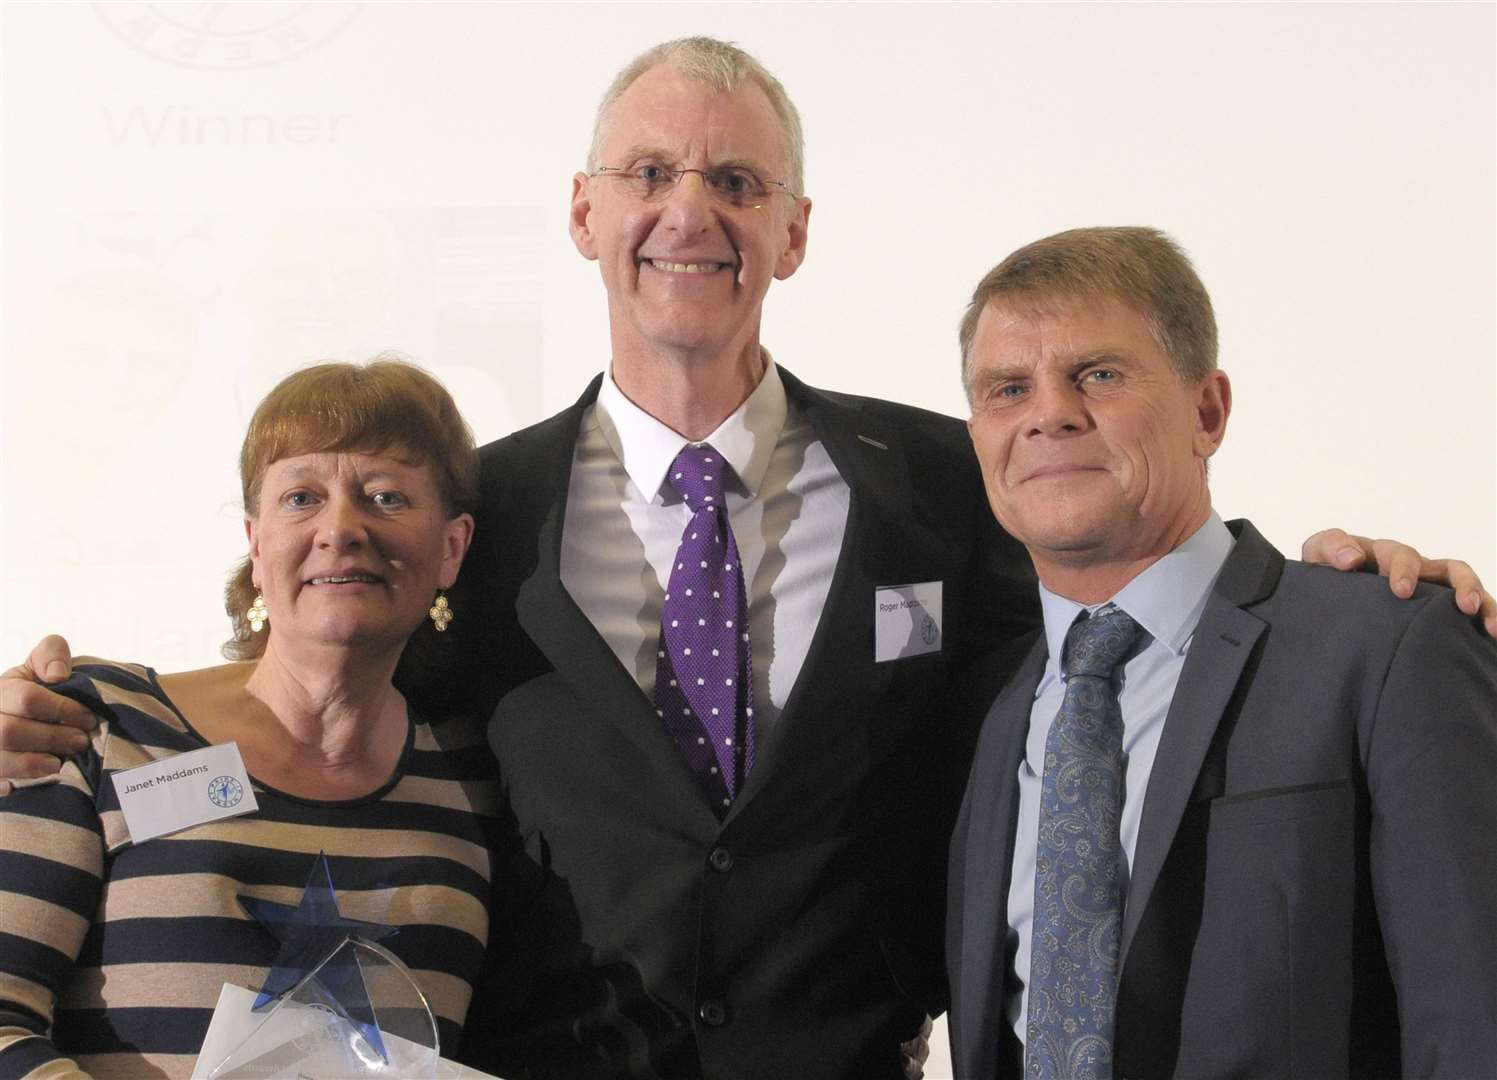 Janet and Roger Maddams alongside Andy Hessenthaler, now Dover Athletic manager, at the 2014 Pride in Medway gala. Picture: Ruth Cuerden